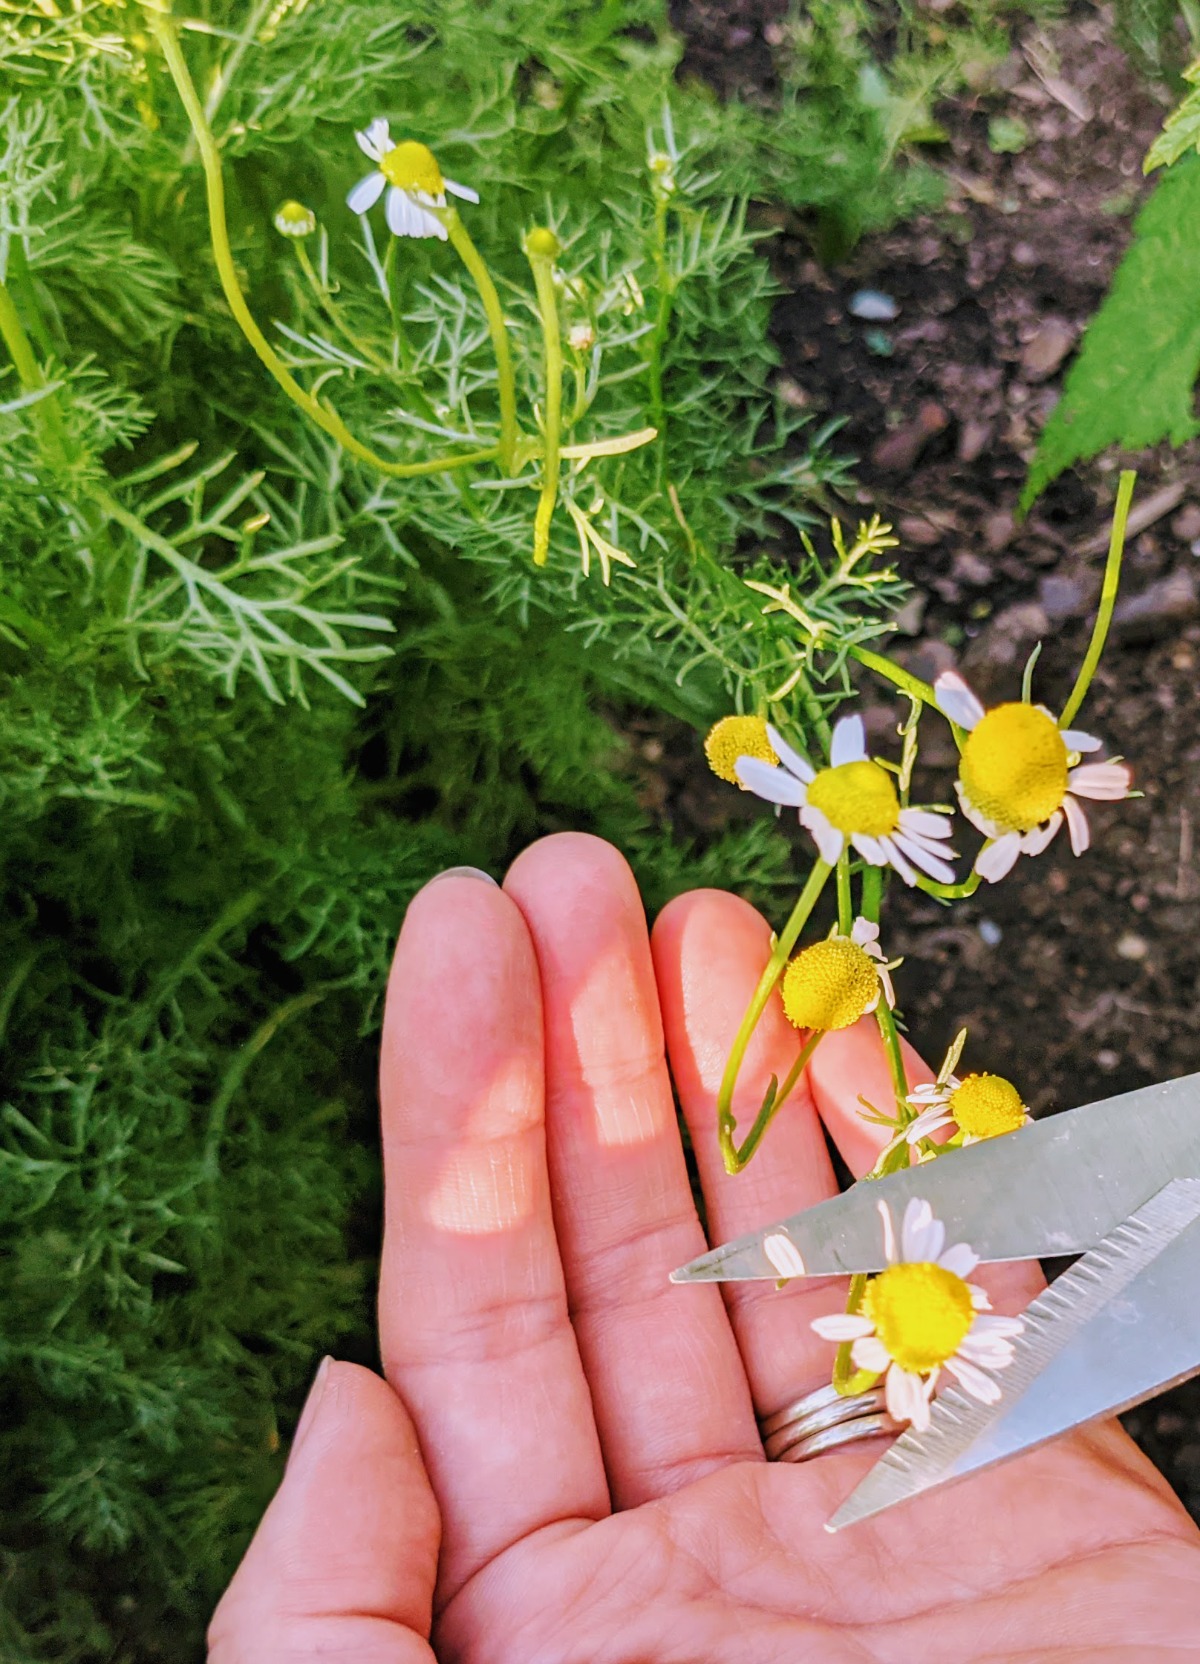 Learning how to harvest chamomile is as easy as picking flowers.